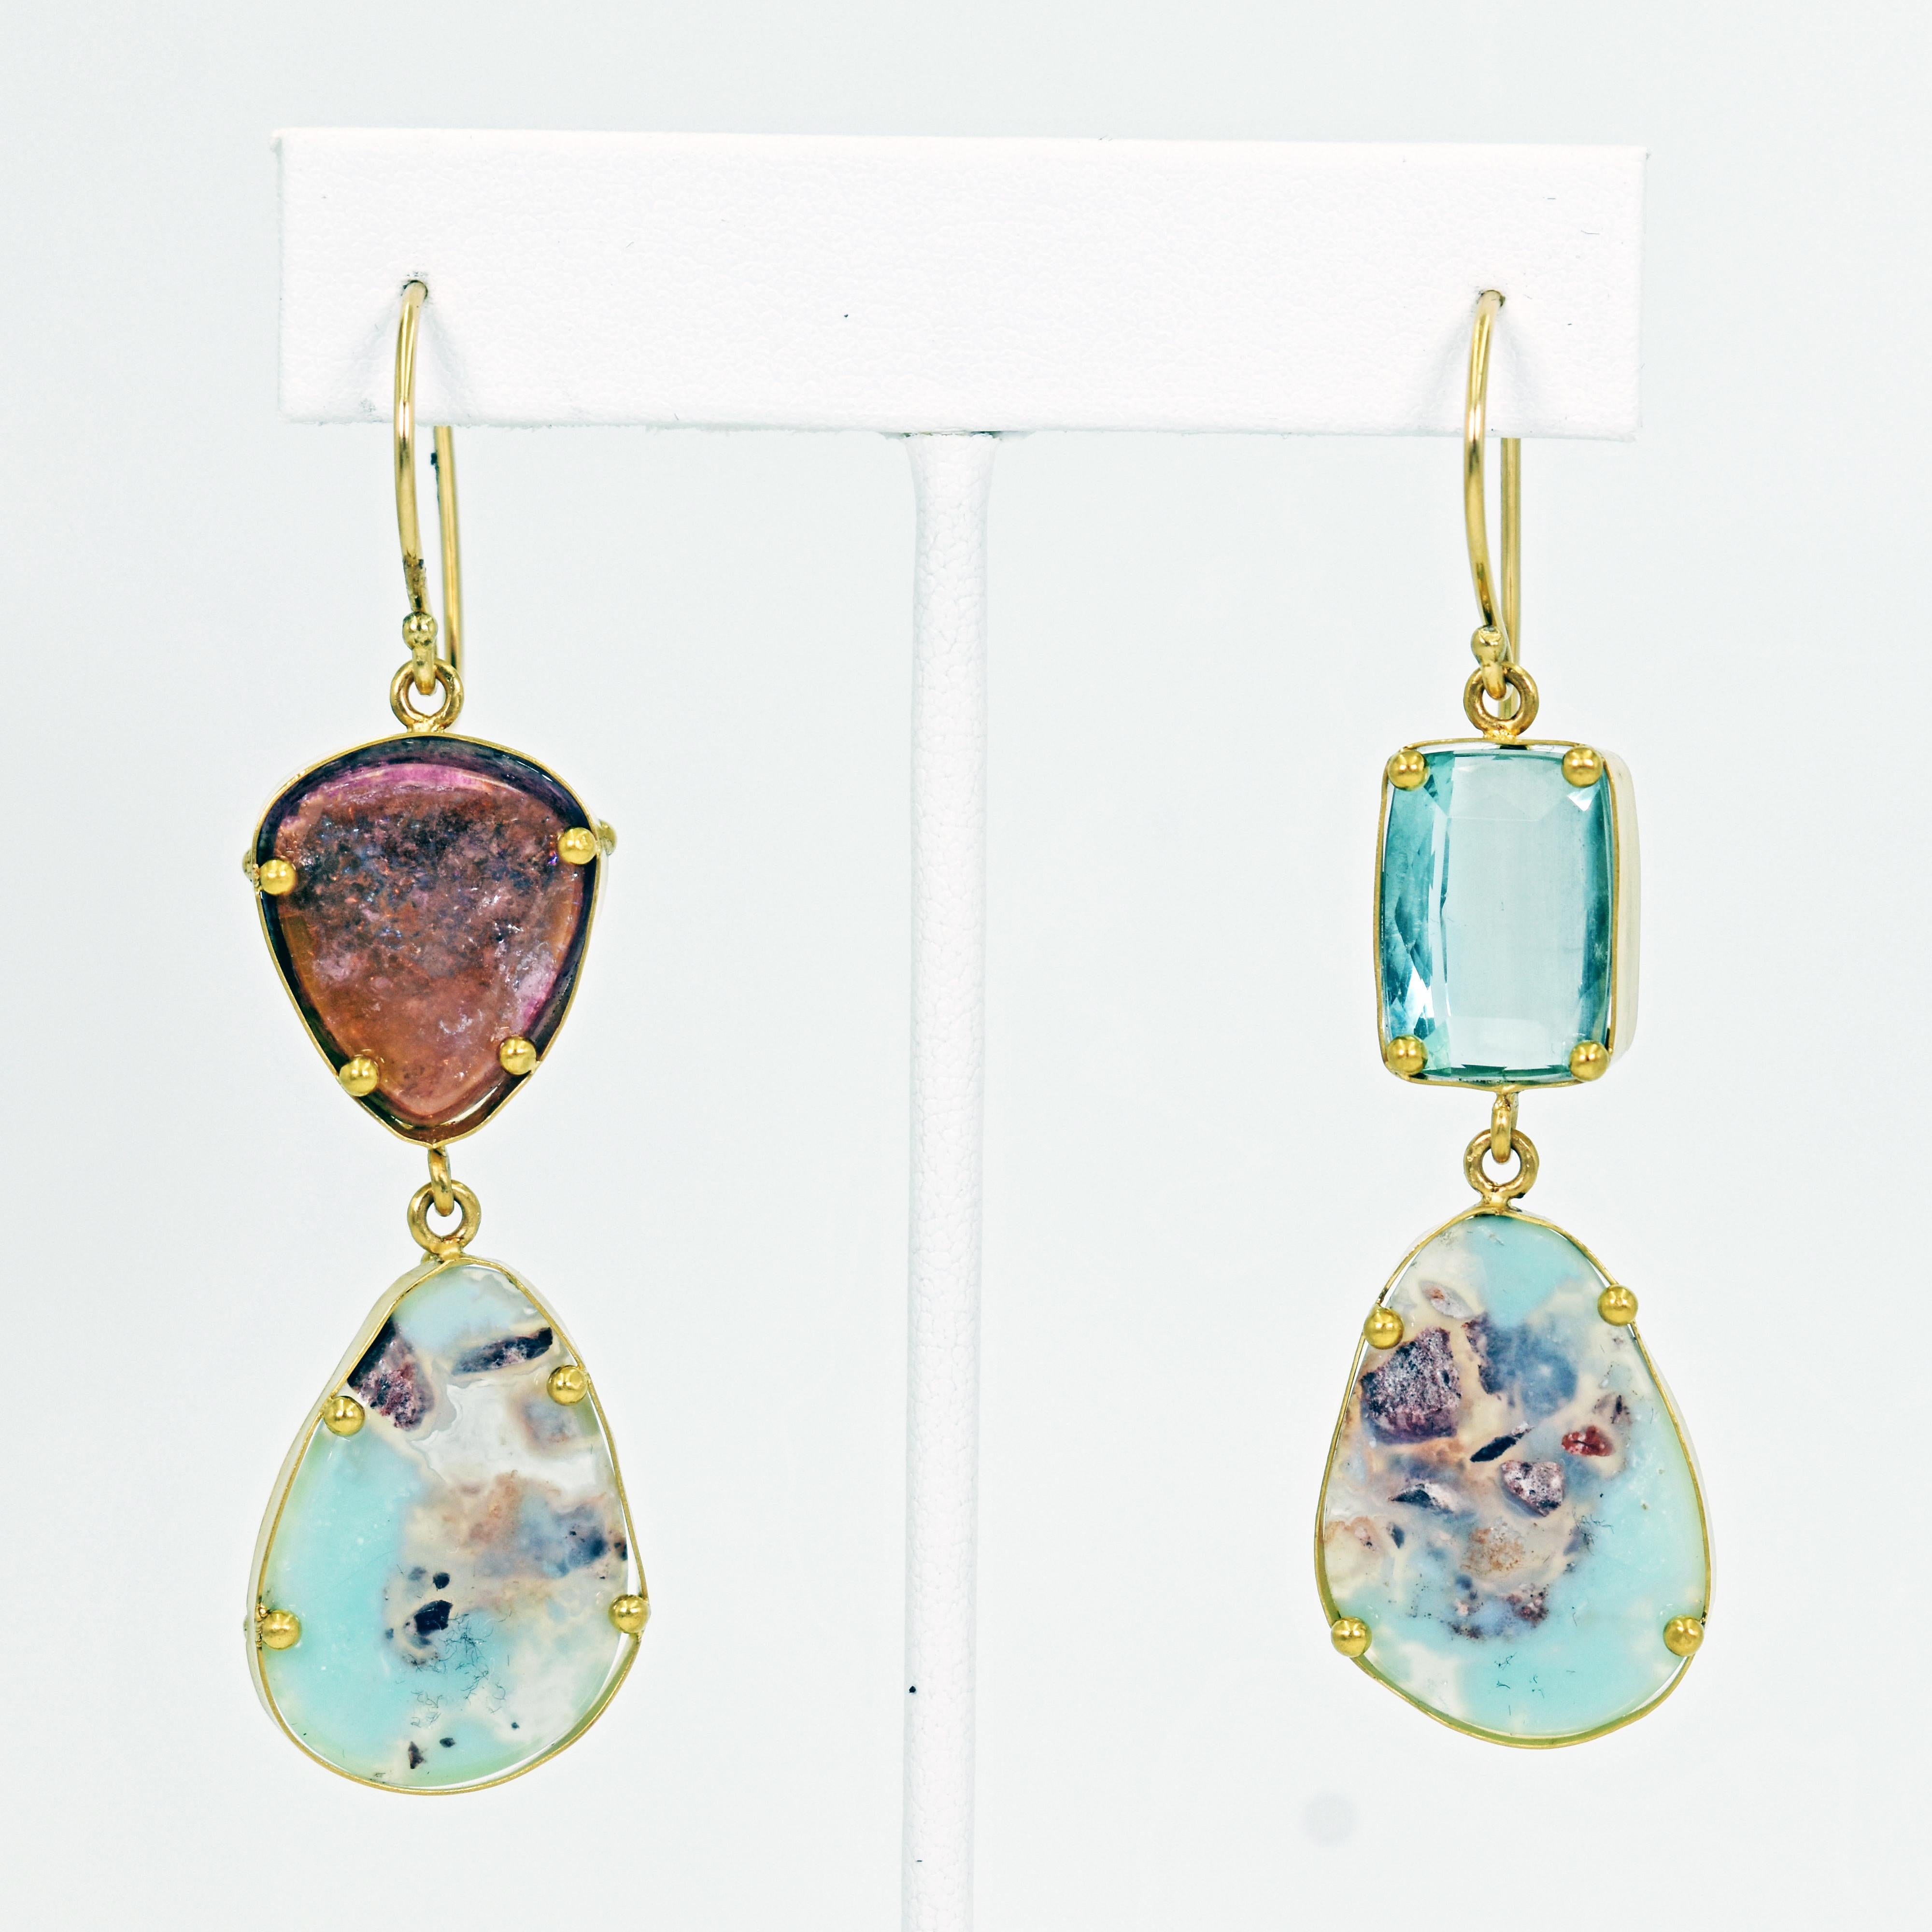 One-of-a-kind, multi-gemstone 22k yellow gold asymmetrical dangle earrings featuring Aquaprase, Russian Watermelon Tourmaline and Aquamarine gemstones. Earrings are 2.75 inches in total length. Unique, artisan earrings with a gorgeous mix of